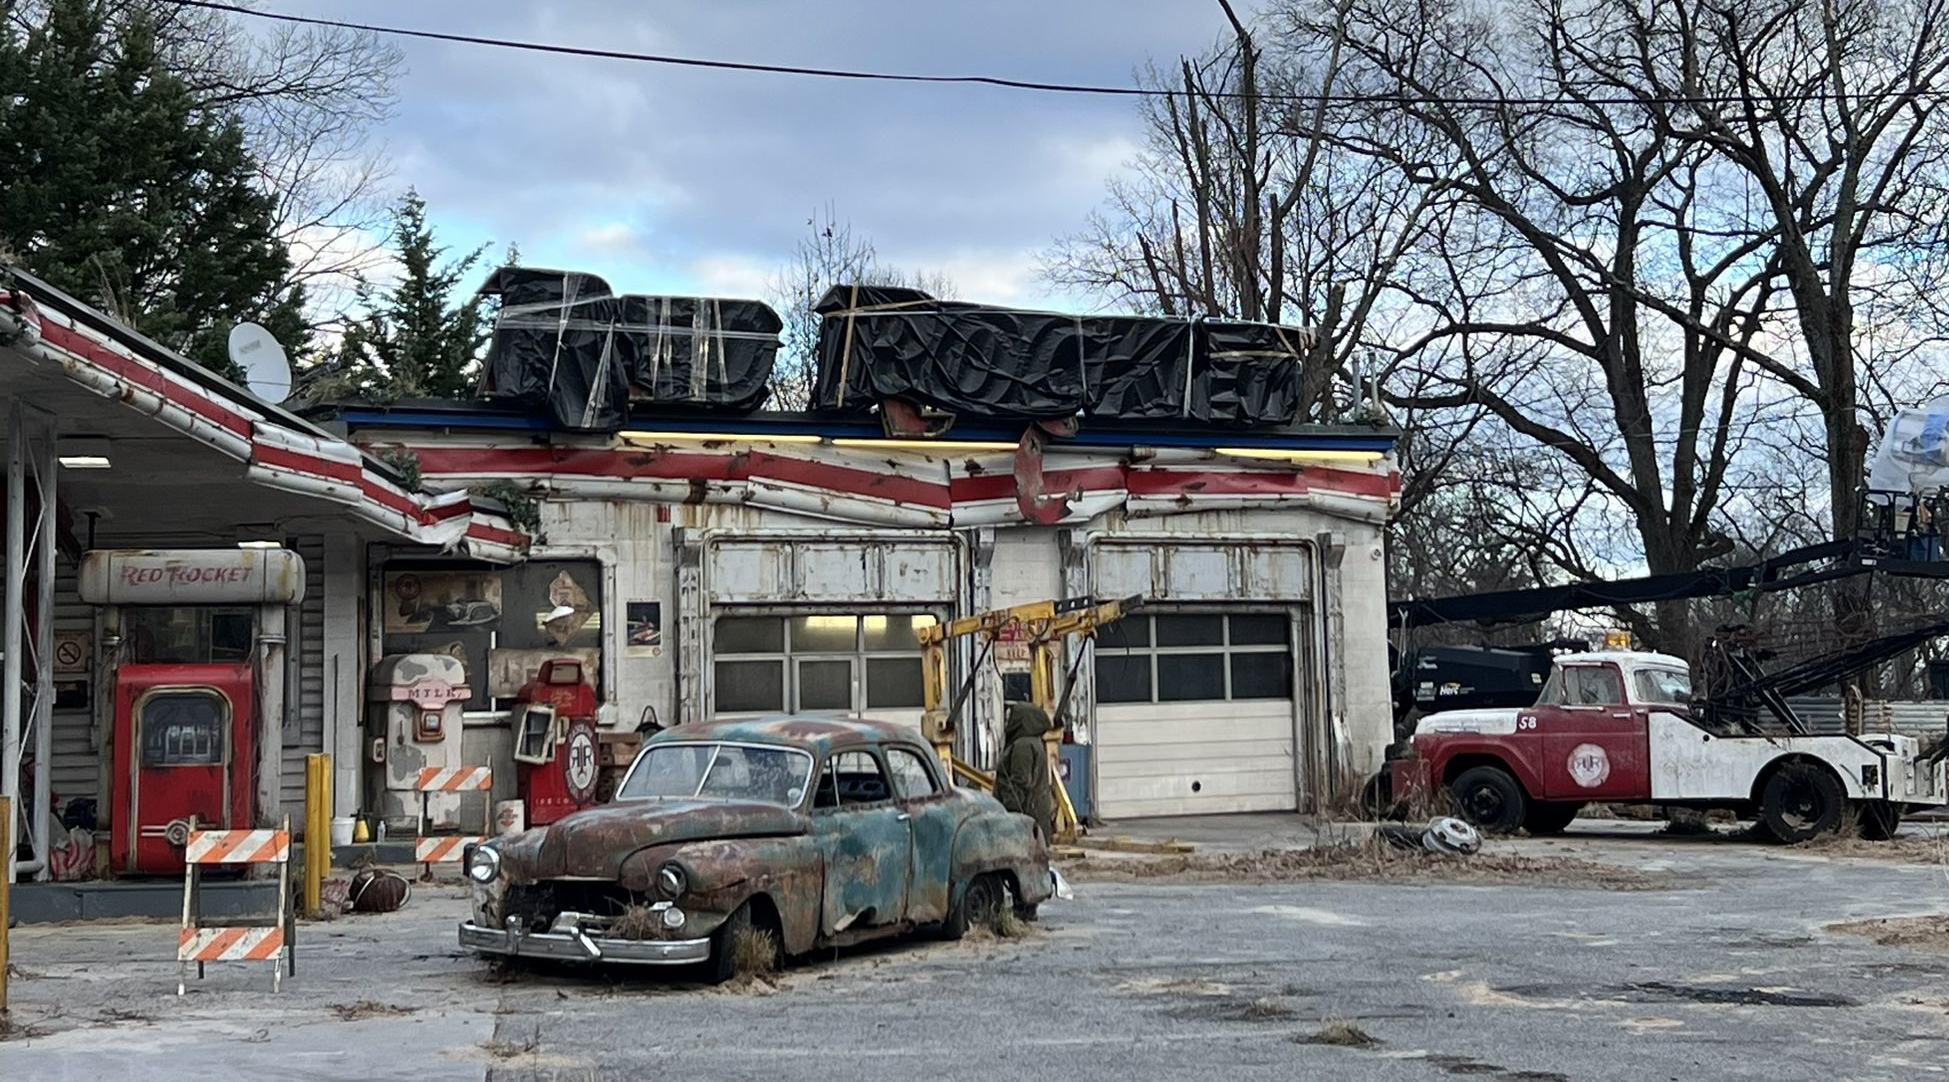 Fallout tv show set red rocket gas station